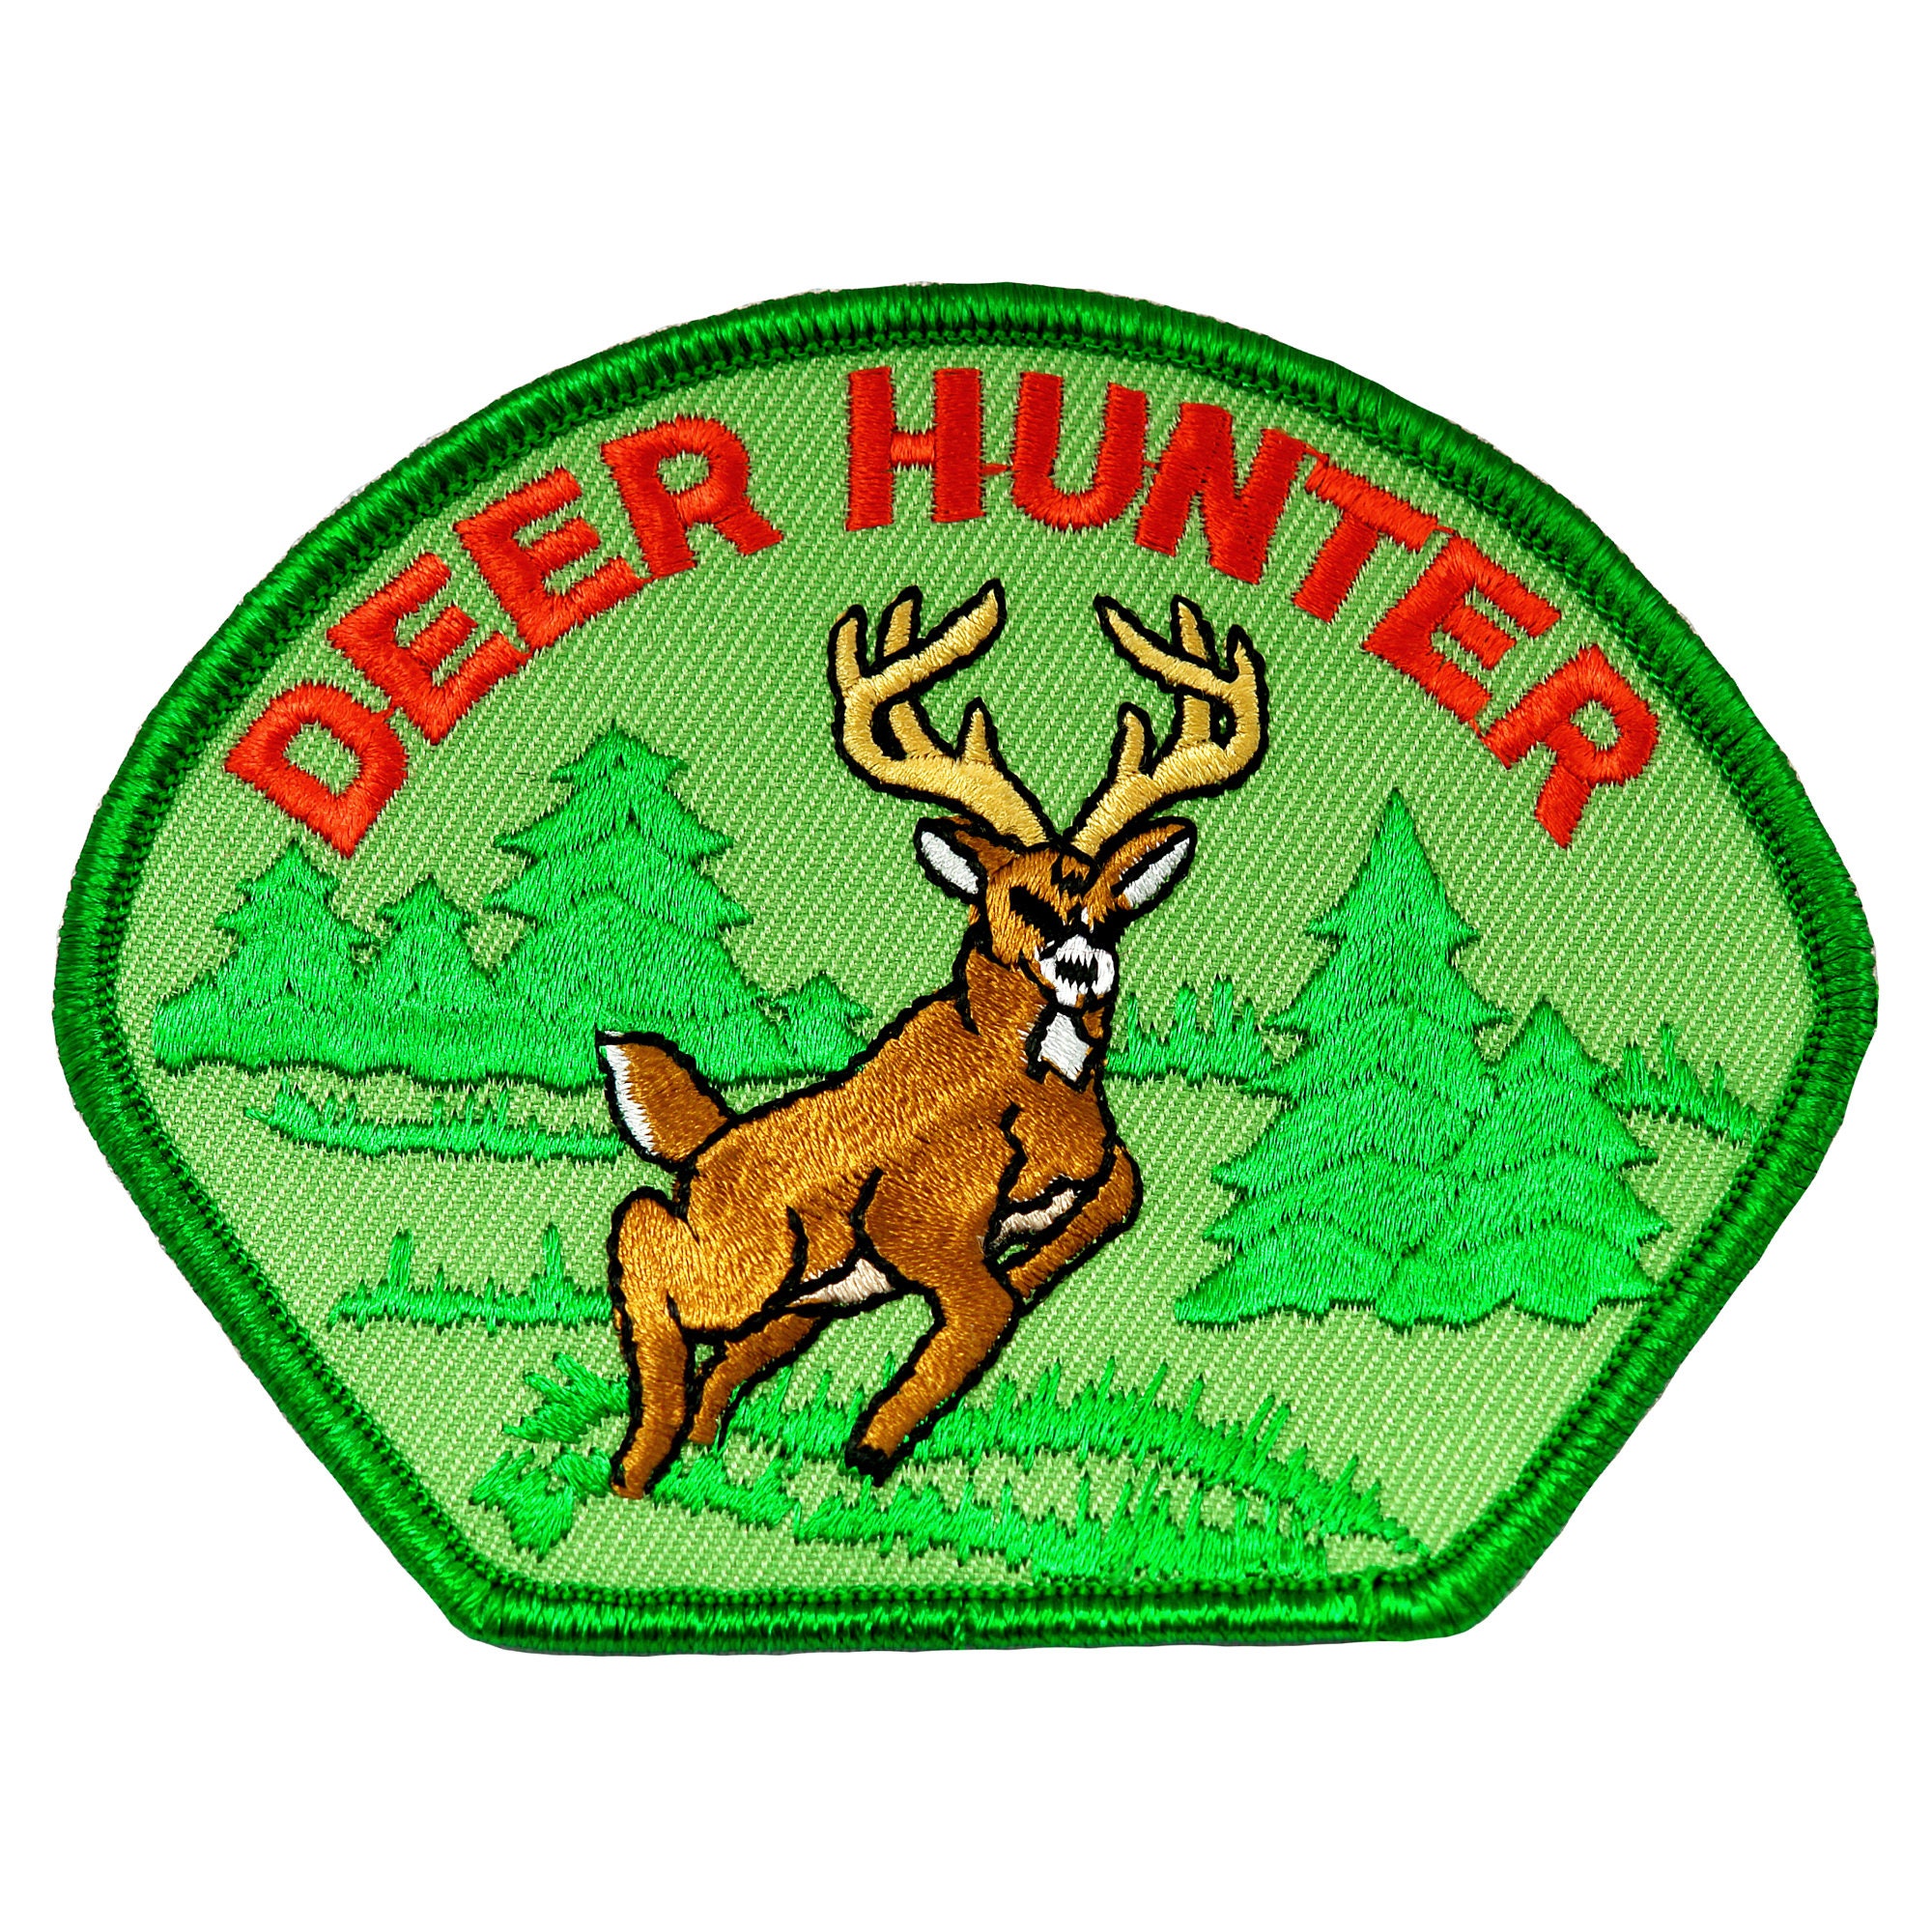 How Long Could You Survive a 'Deer Hunter' Game of Russian Roulette?